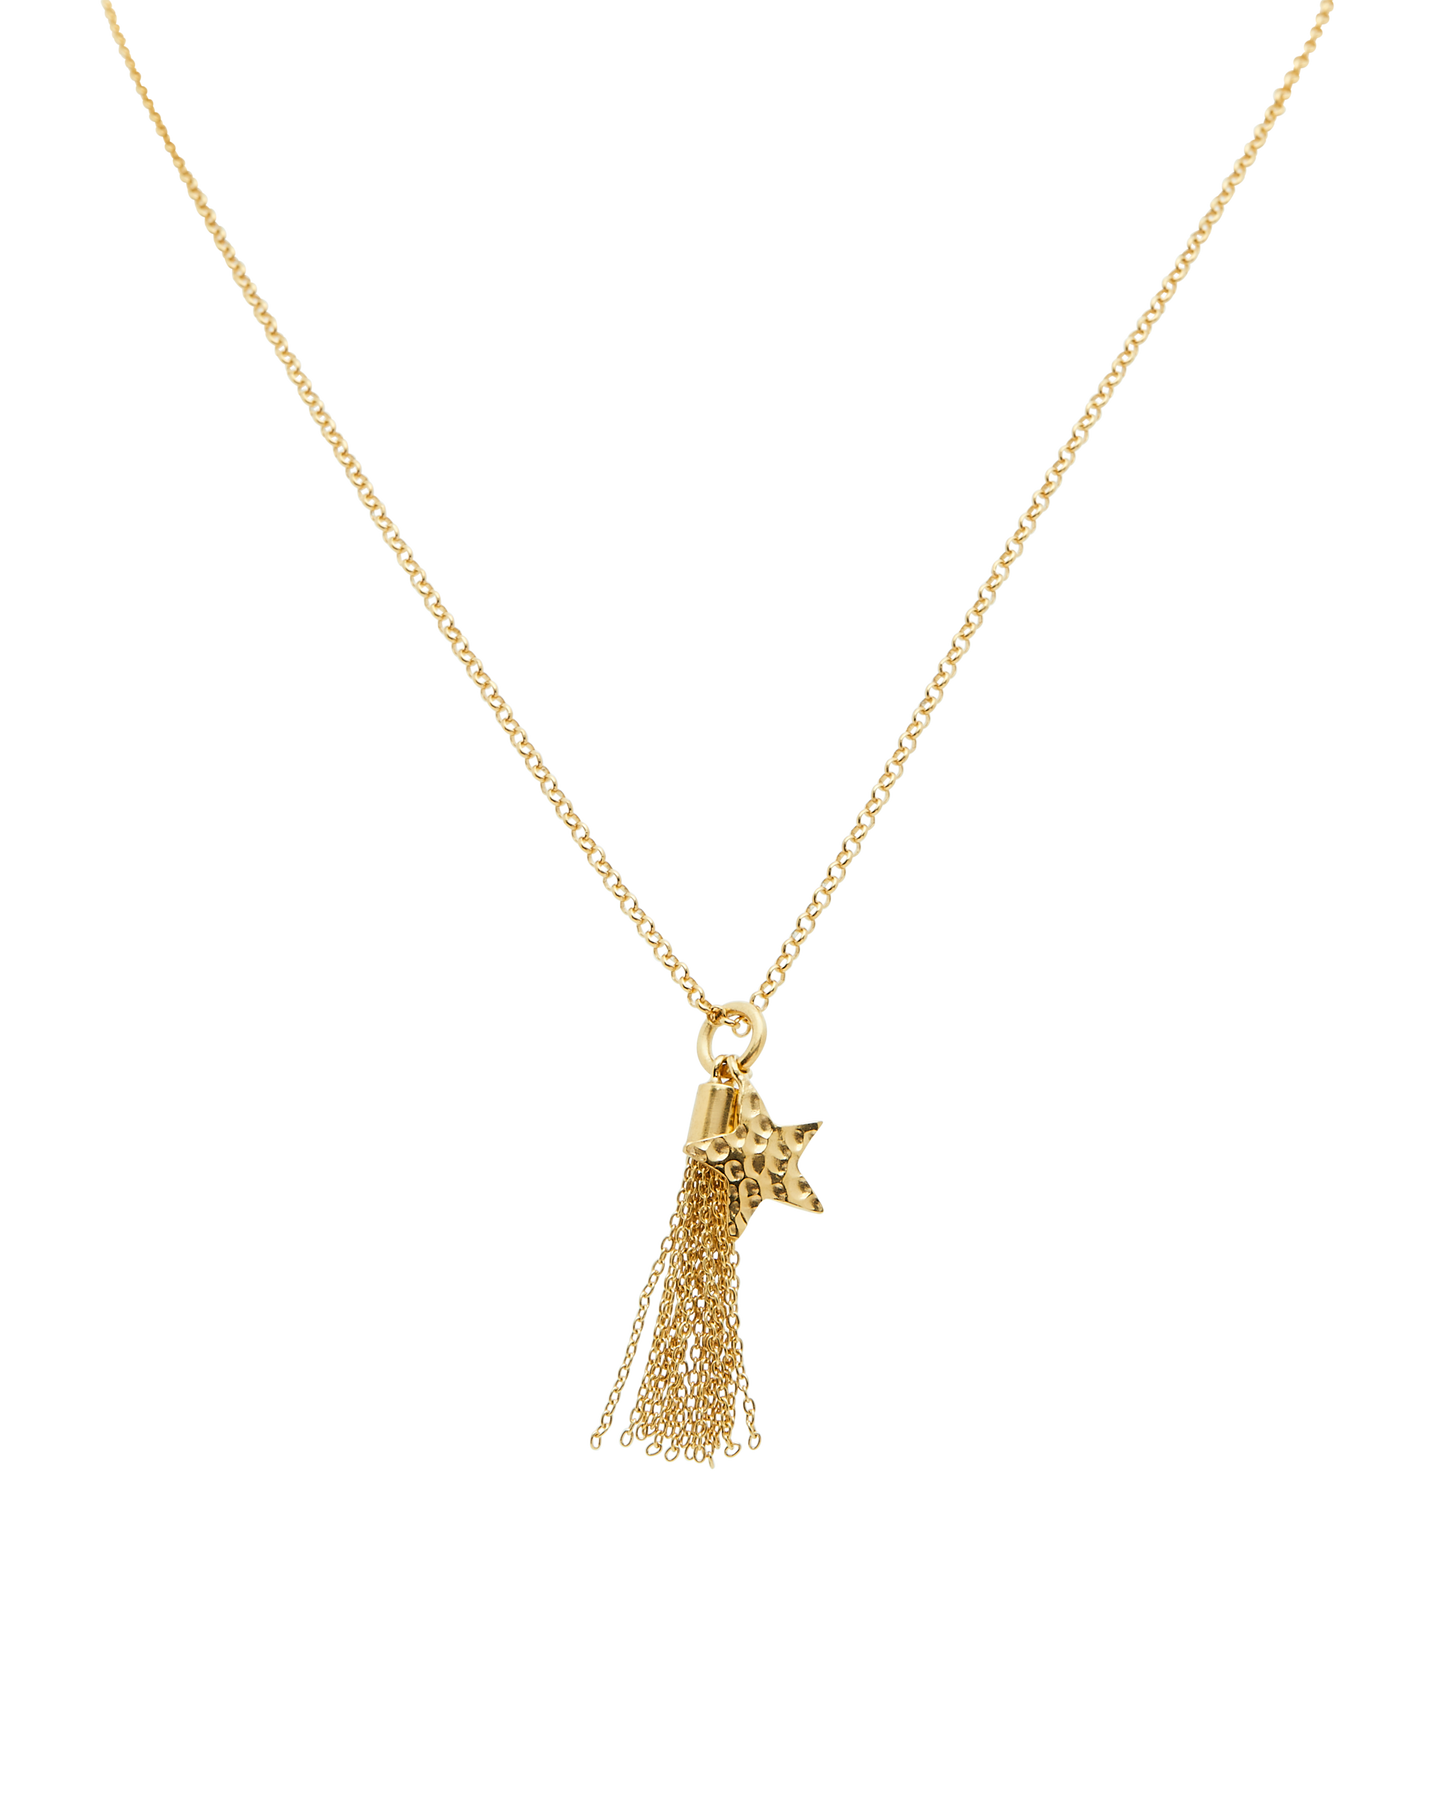 Shooting Star Tassle Necklace in Gold